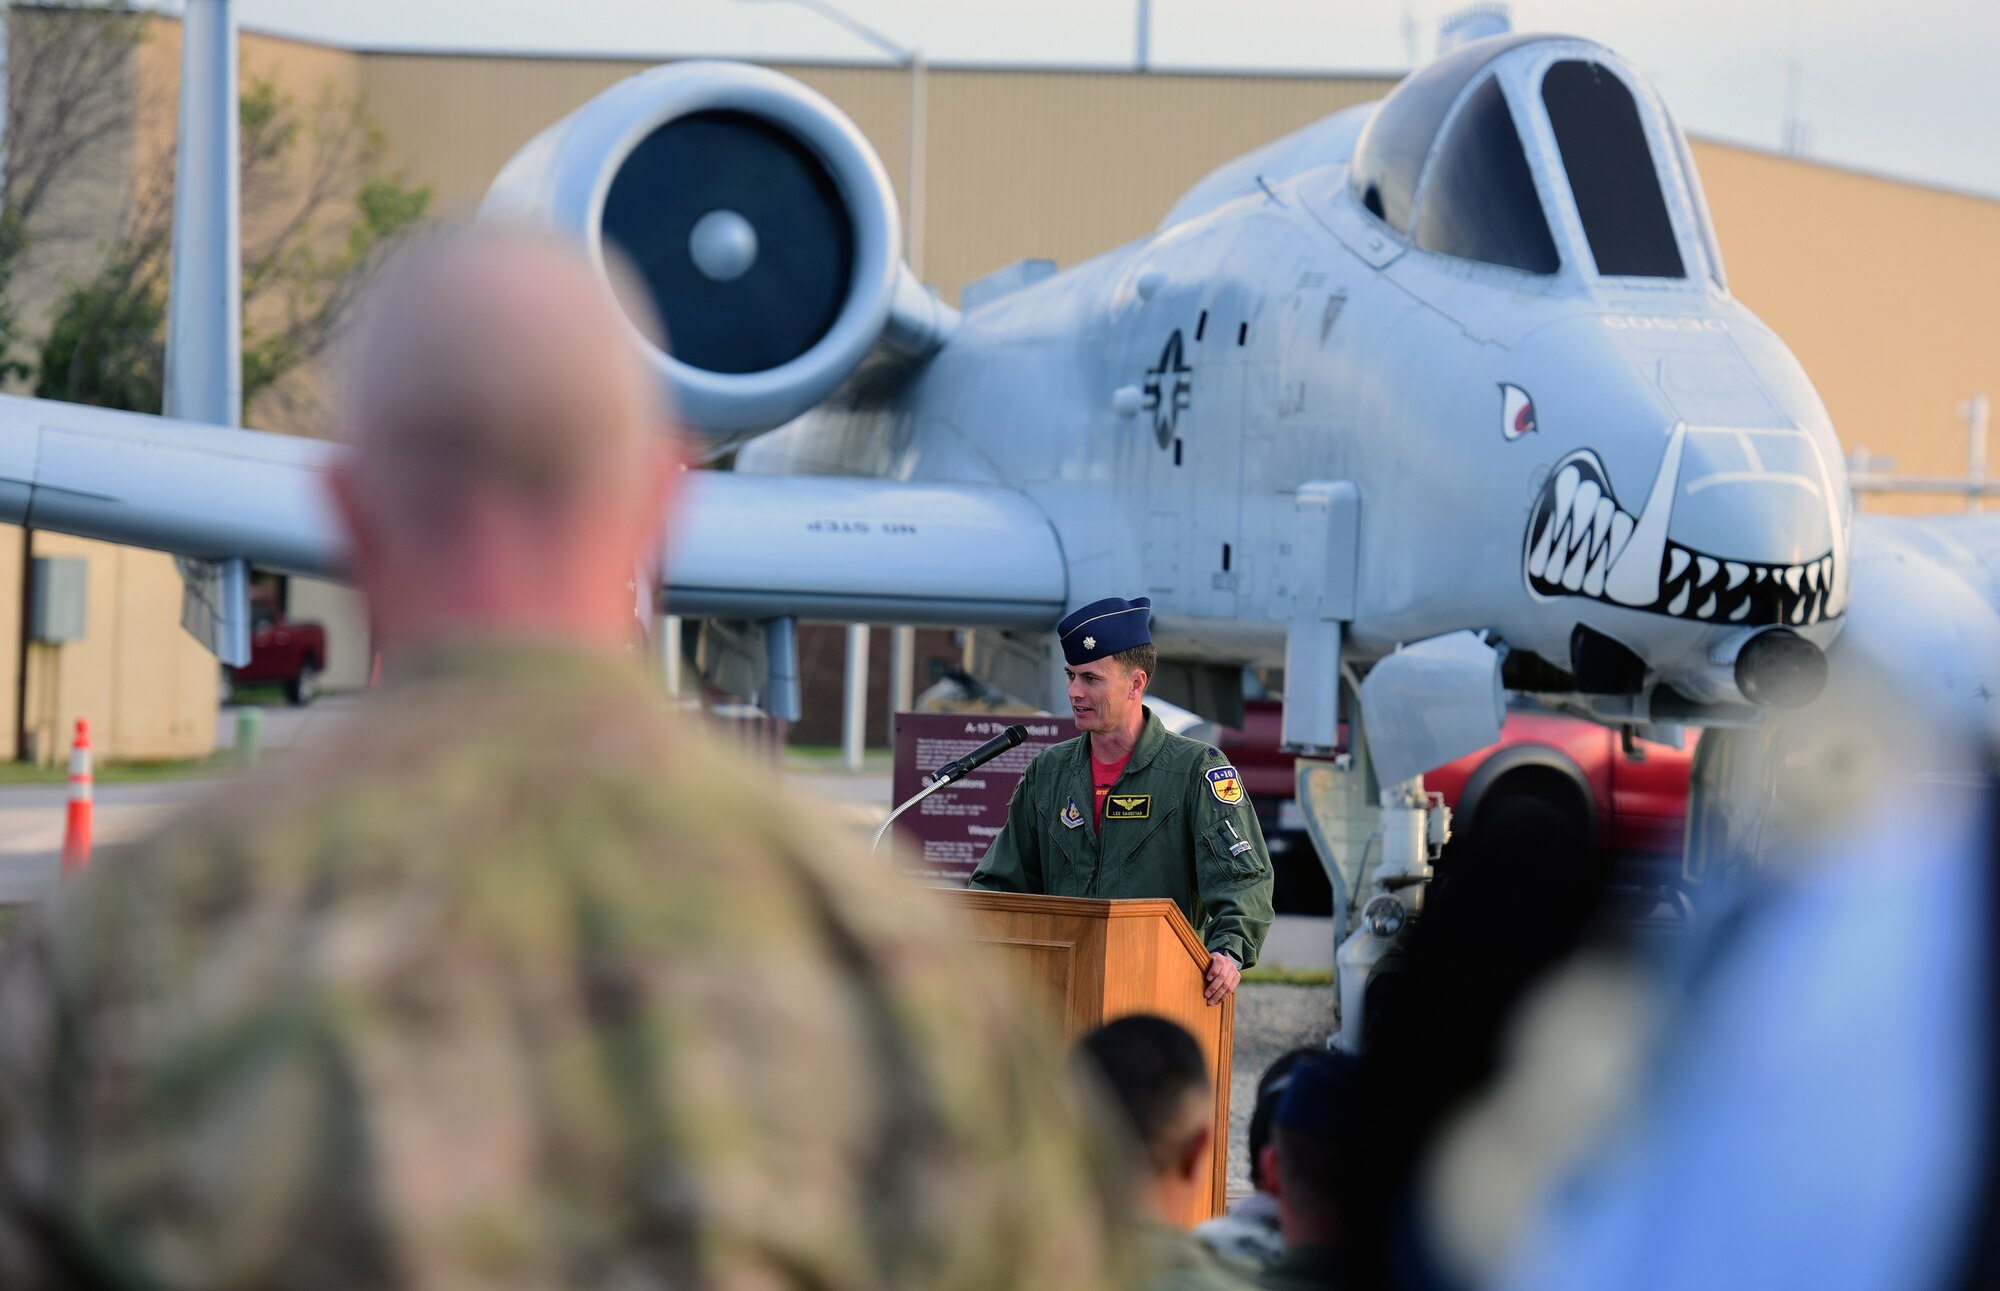 The remembrance ceremony was held in honor of fallen A-10 pilots and signals the start of 2018 Hawgsmoke competition, which is a biennial worldwide A-10 bombing, missile and tactical gunnery competition derived from the discontinued "Gunsmoke" Air Force Worldwide Gunnery Competition.